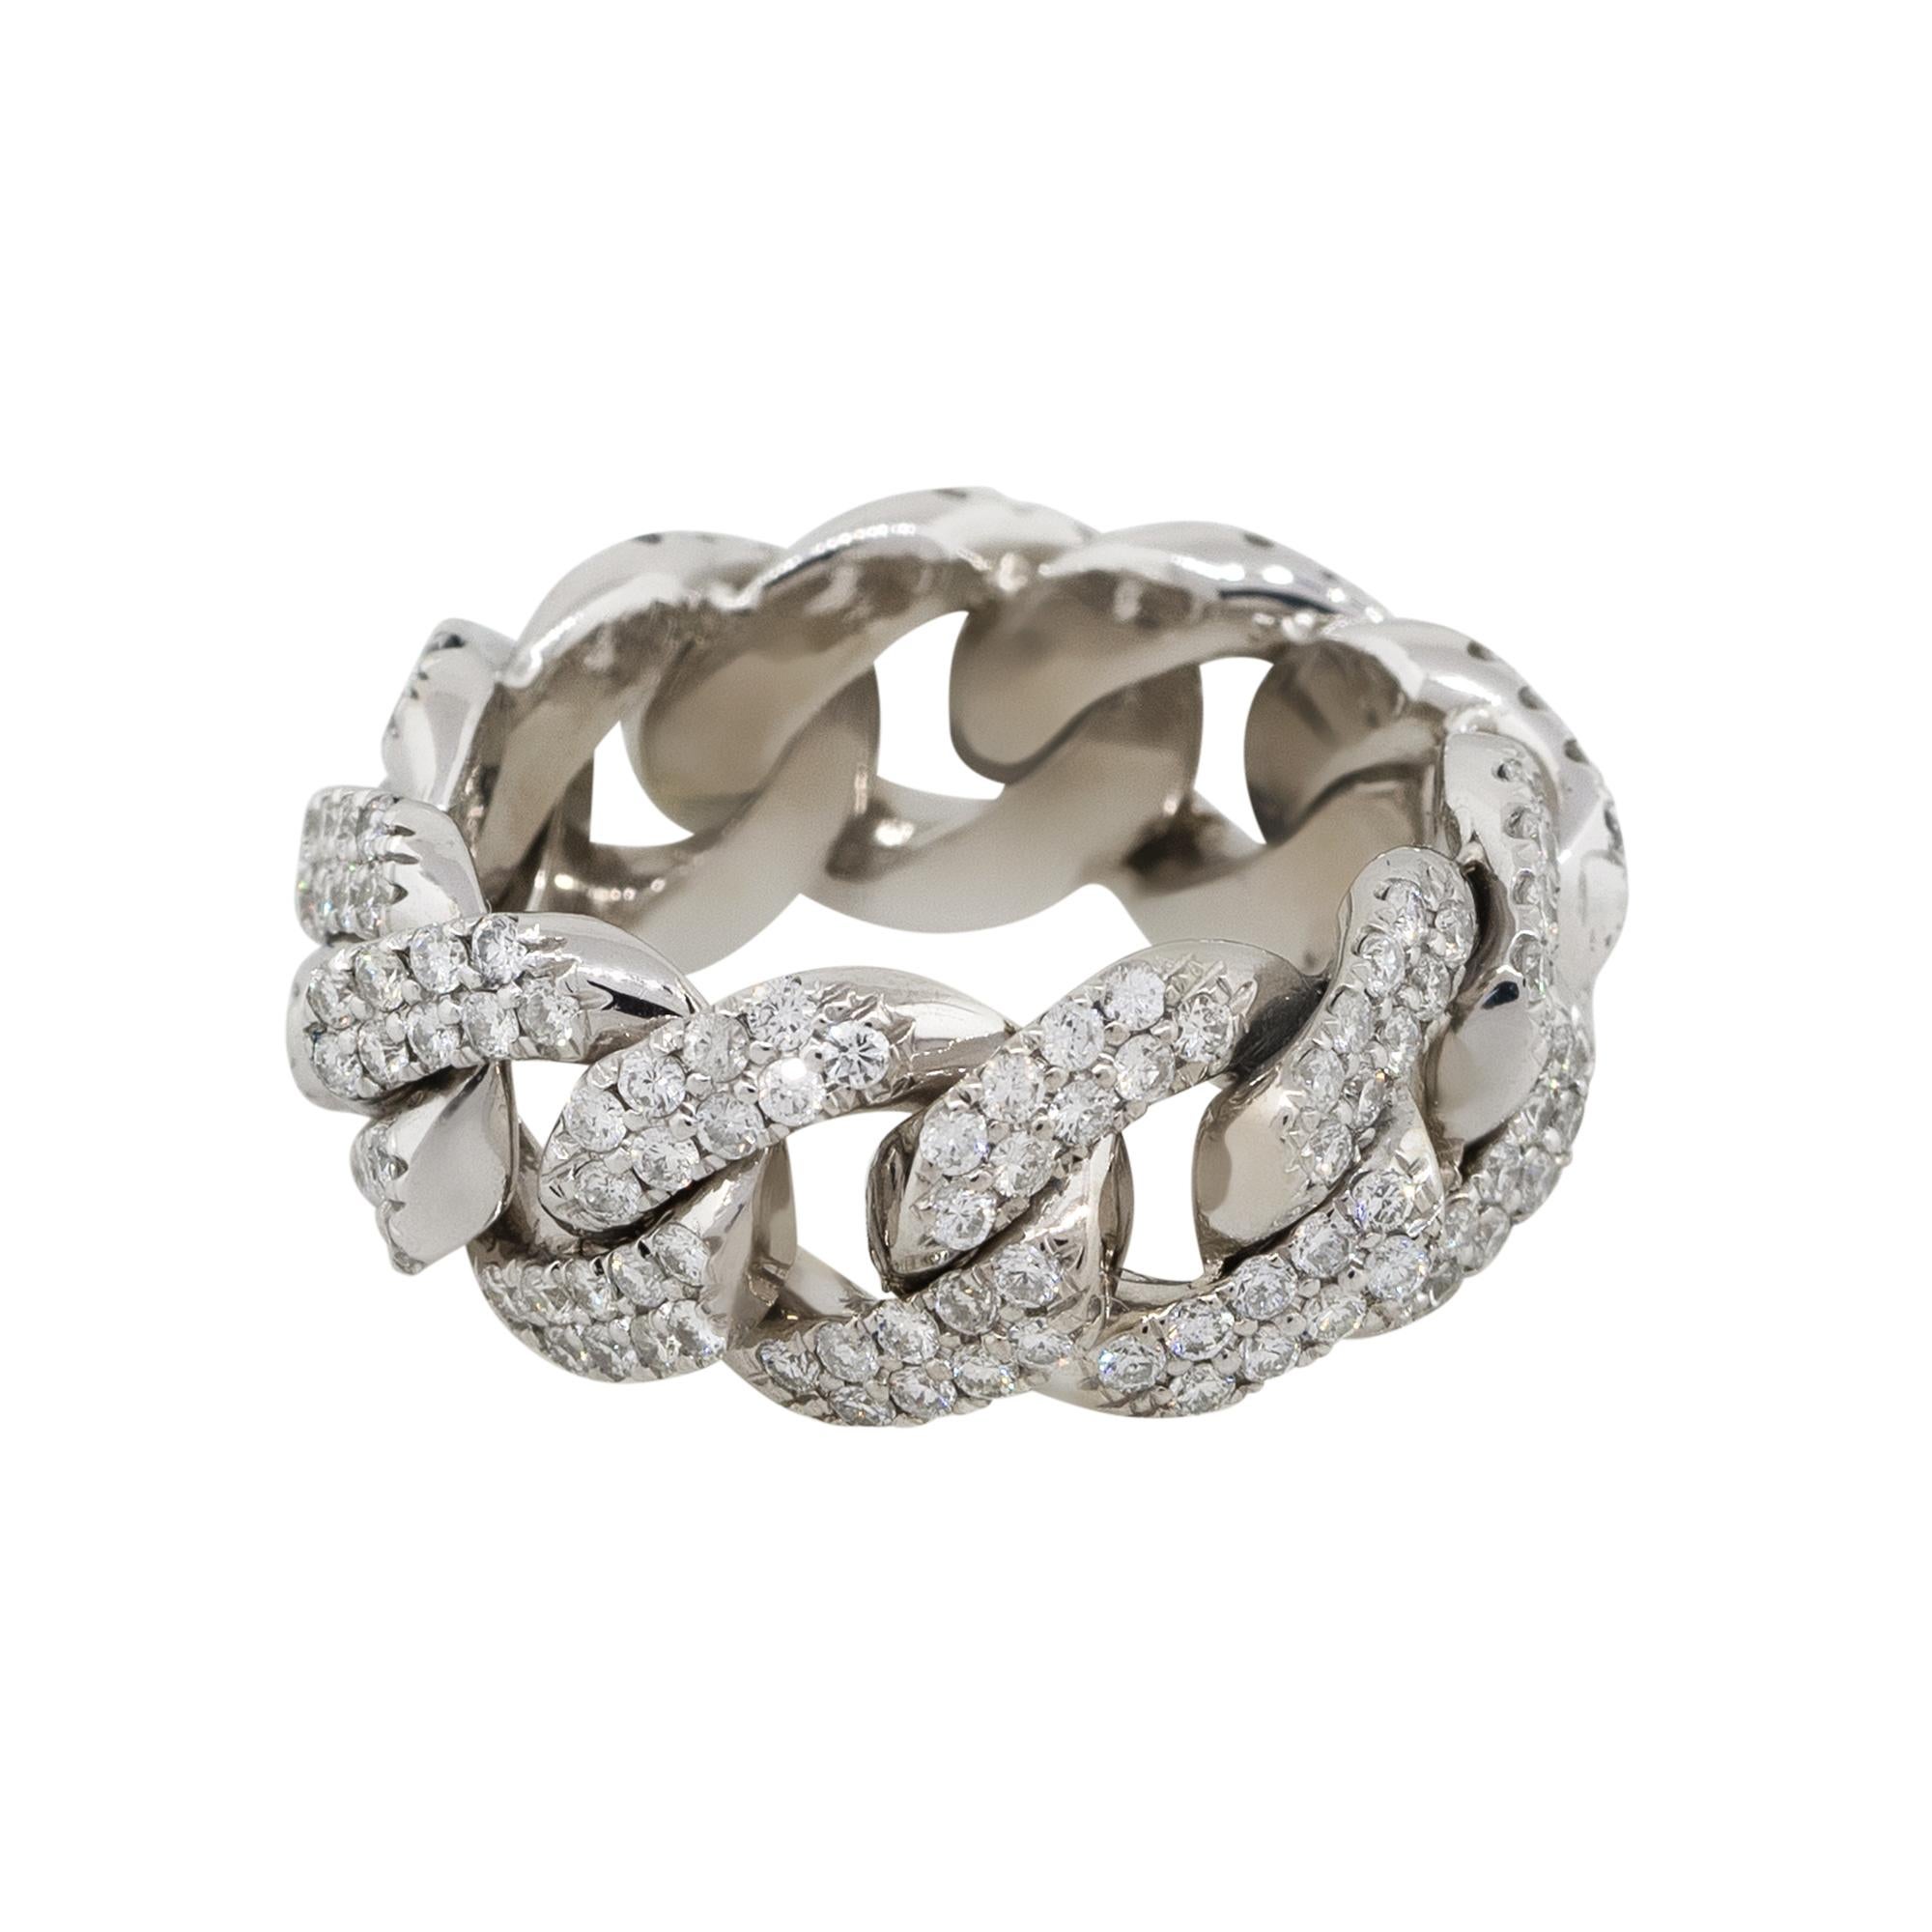 Material: 14k white gold
Diamond Details: Approx. 2.5ctw of round cut Diamonds. Diamonds are G/H in color and VS in clarity
Ring Size: 8
Ring Measurements: 1